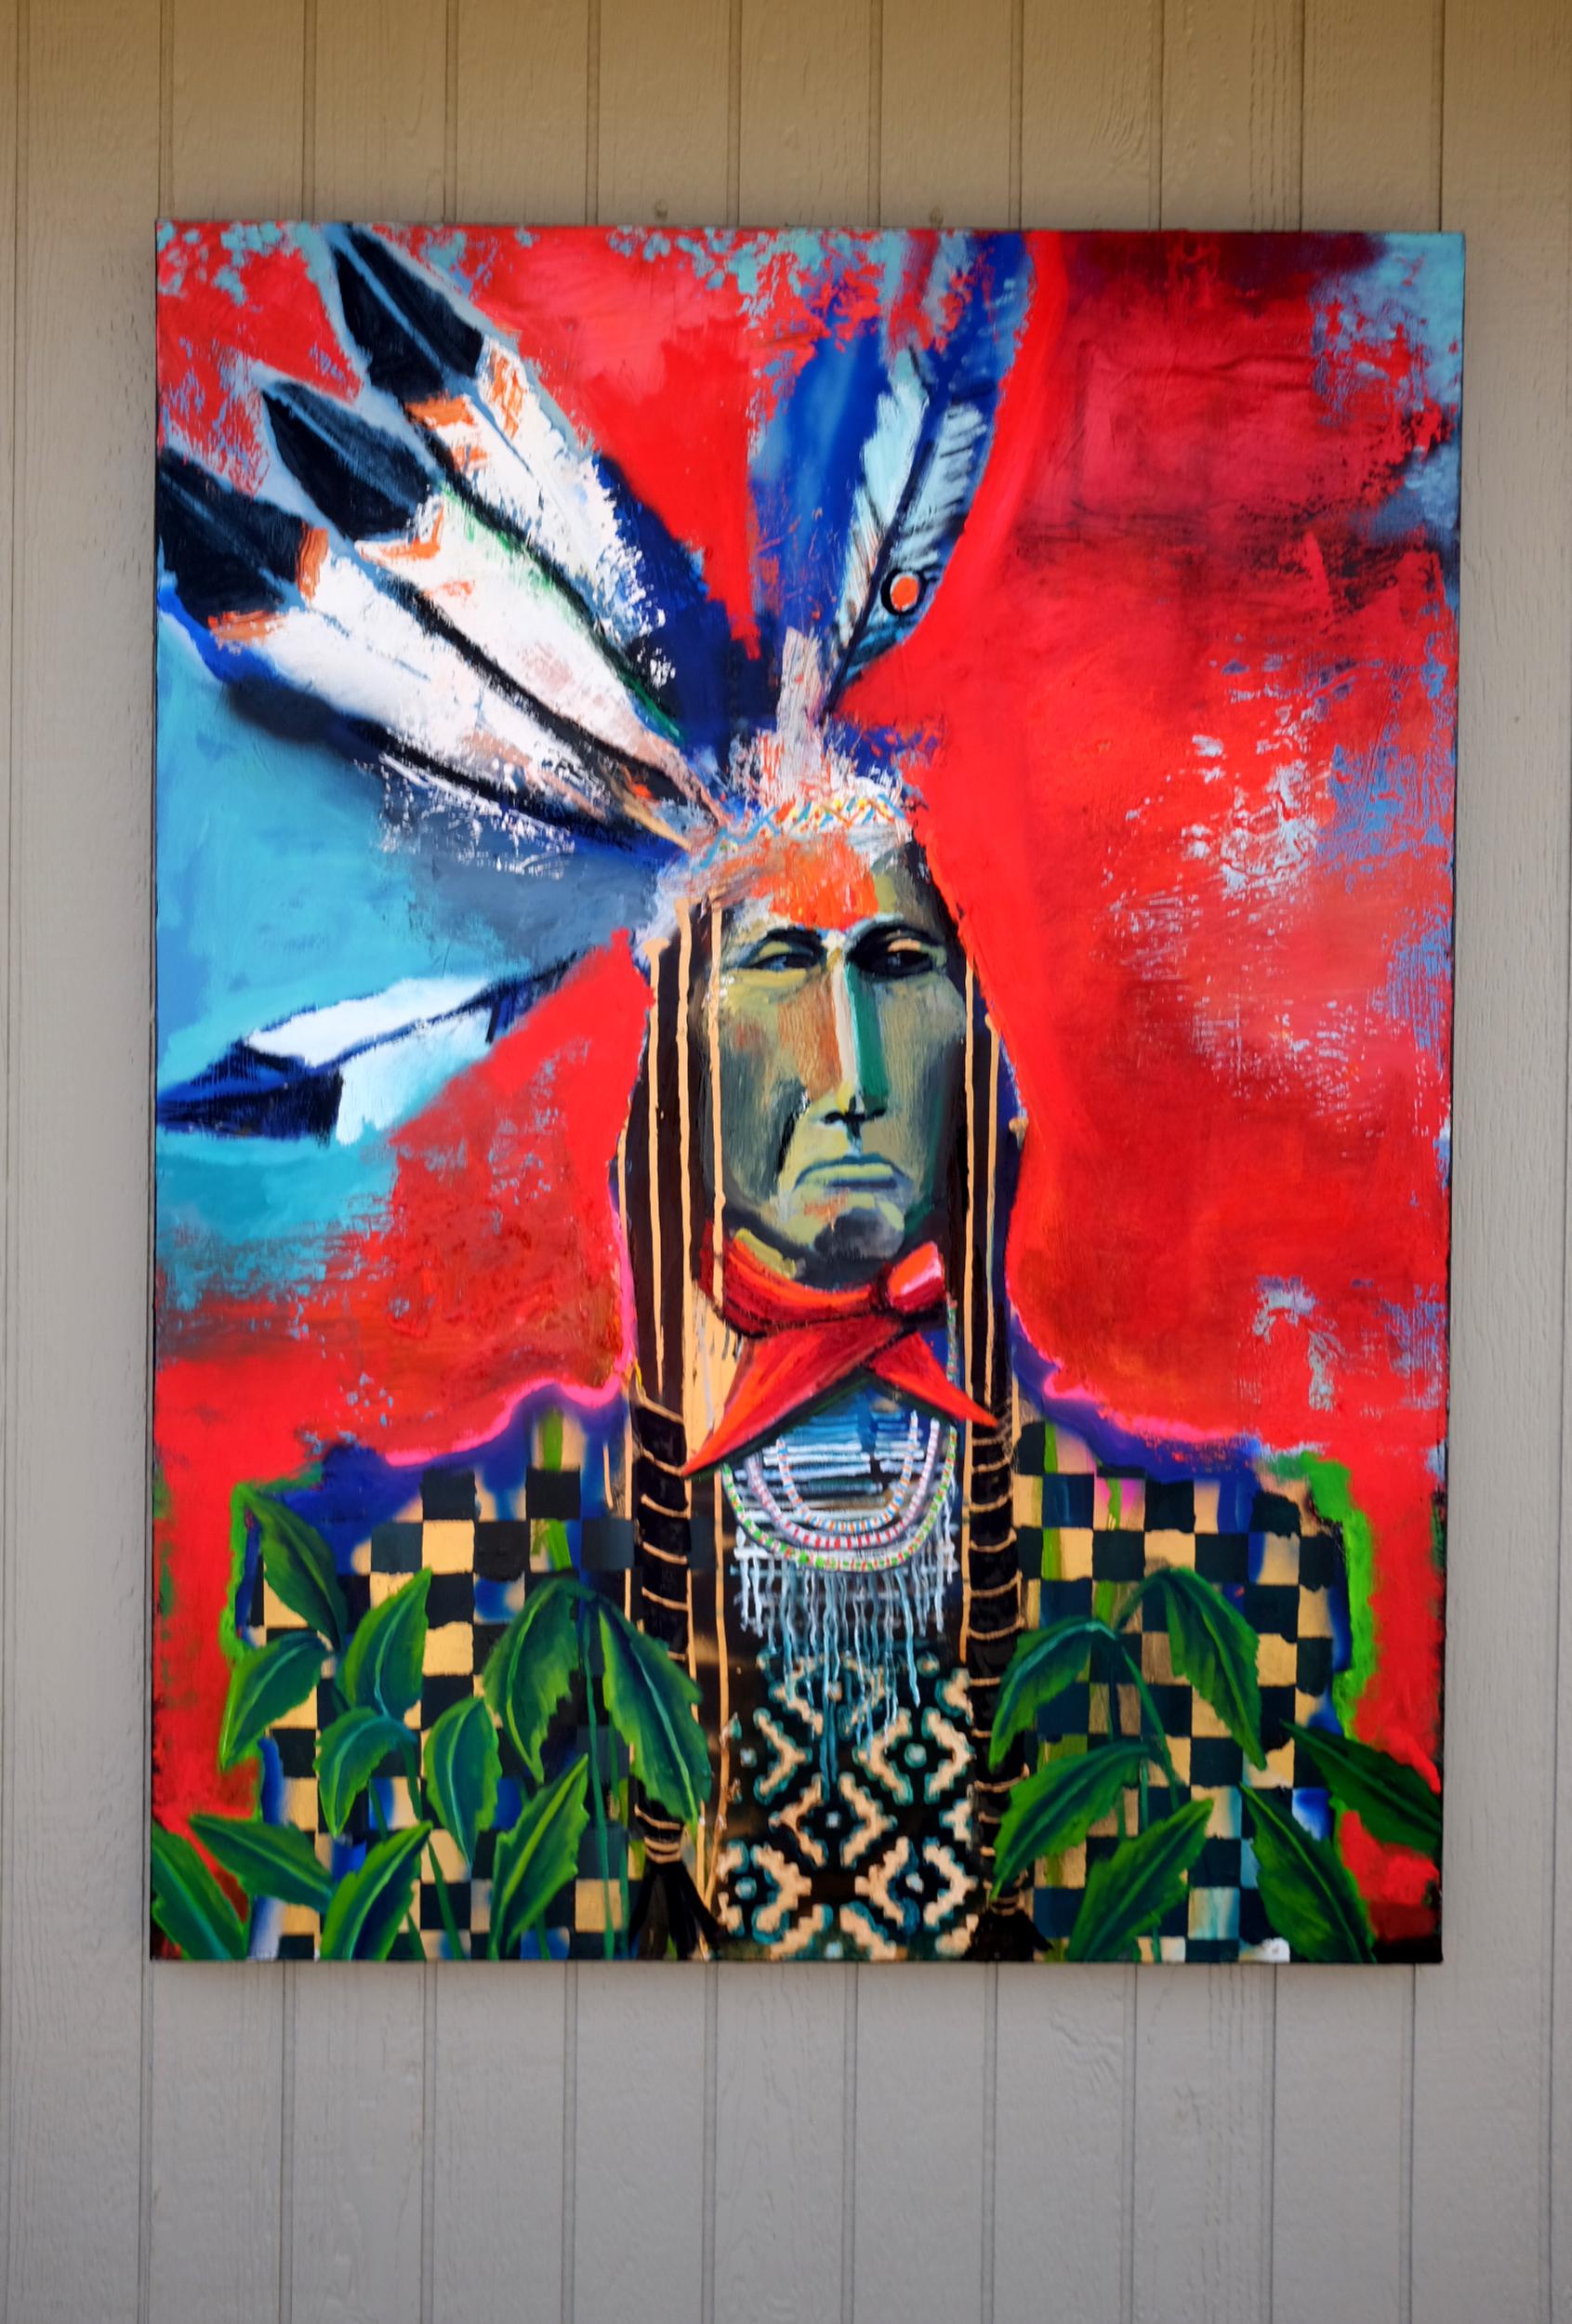 <p>Artist Comments<br>A chief stands with authority and an admirable expression, his head adorned with a feathered headdress, his body draped in patterned fabric, and his neck adorned with accessories. Against a vibrant red background, his